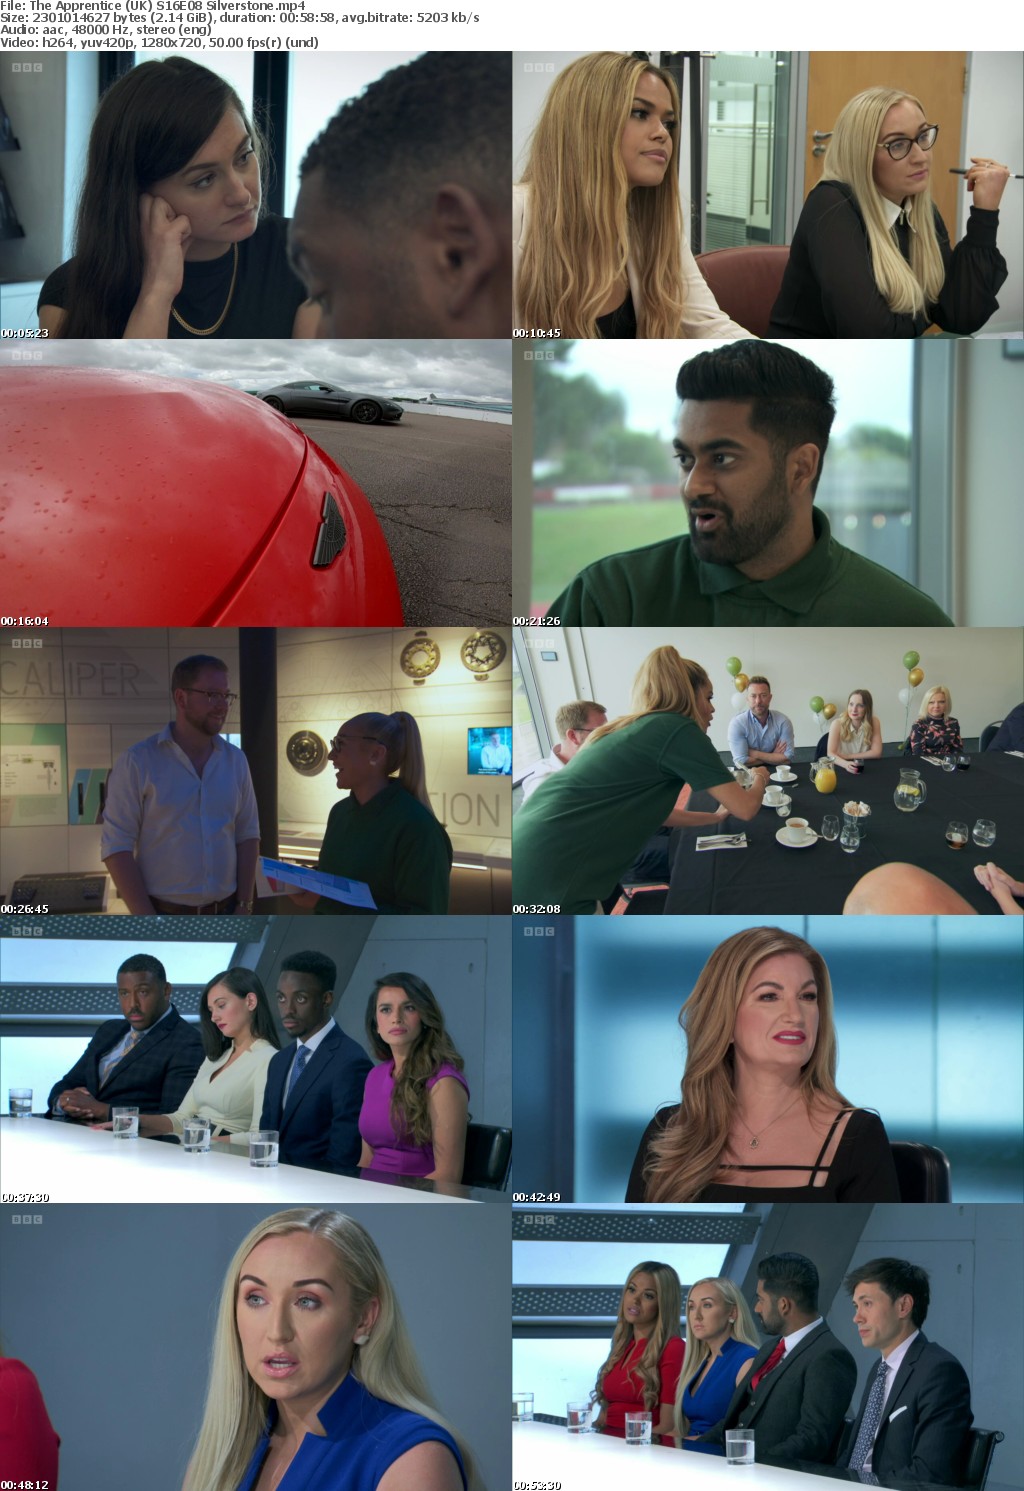 The Apprentice (UK) S16E08 Silverstone (1280x720p HD, 50fps, soft Eng subs)